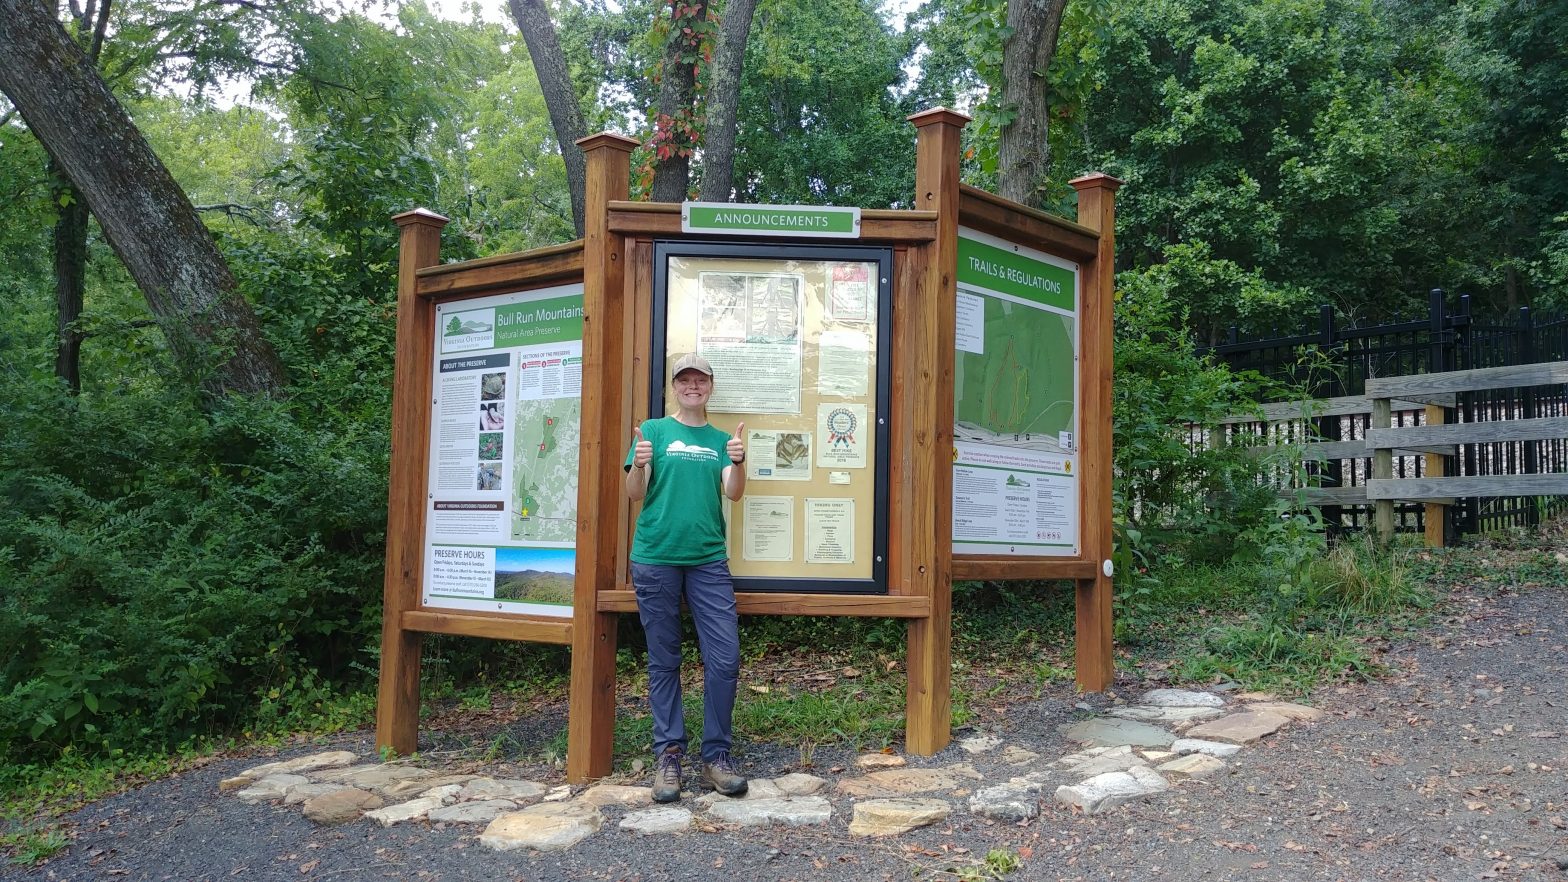 VOF kicks off interpretive signage project at Bull Run Mountains with new kiosk signage